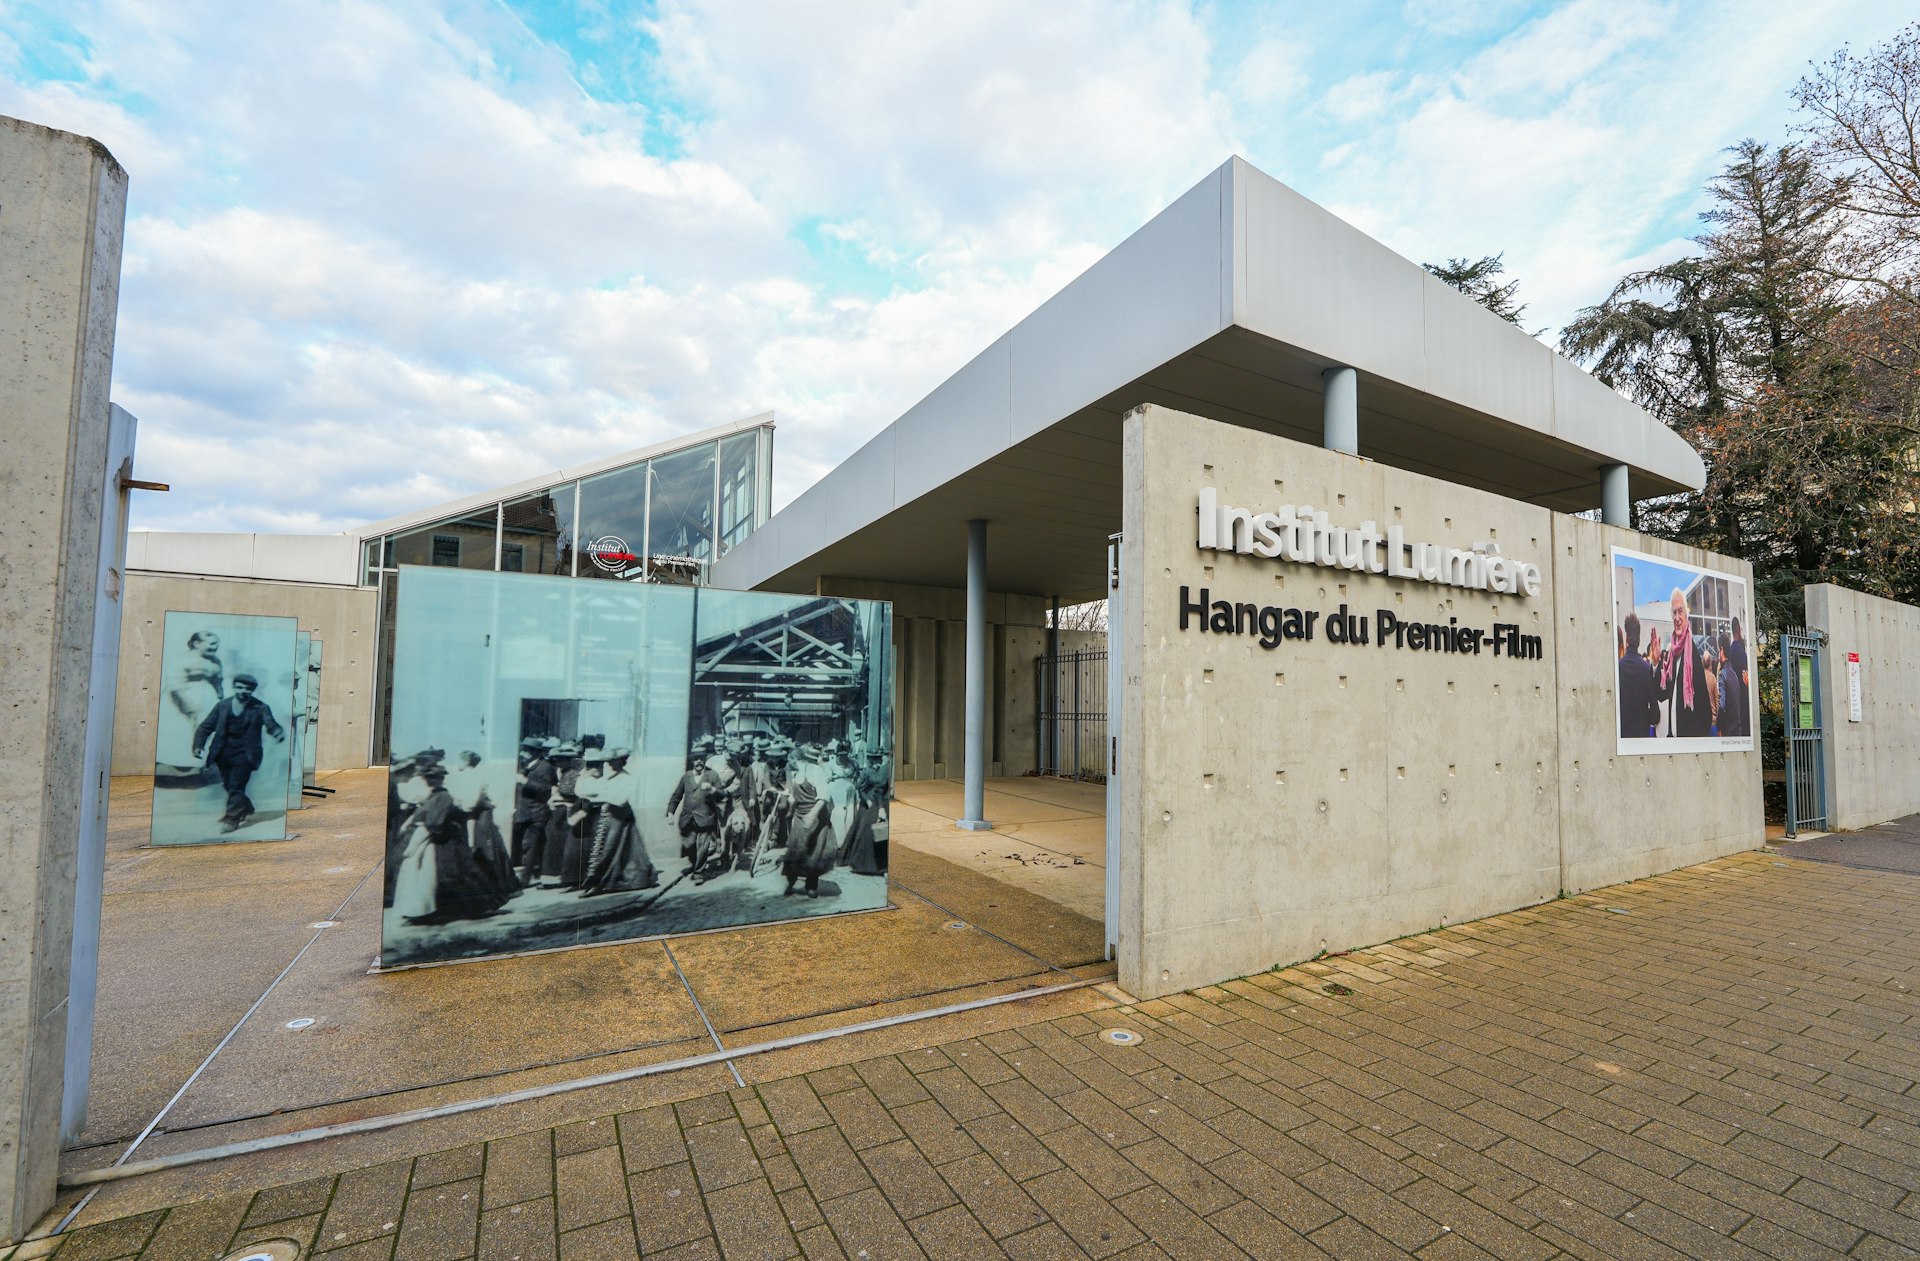 Outside view of Hangar du Premier Film ("Hangar of the First Movie") at the Lumière Institute, the former factory where Auguste and Louis Lumière shot the first film in history